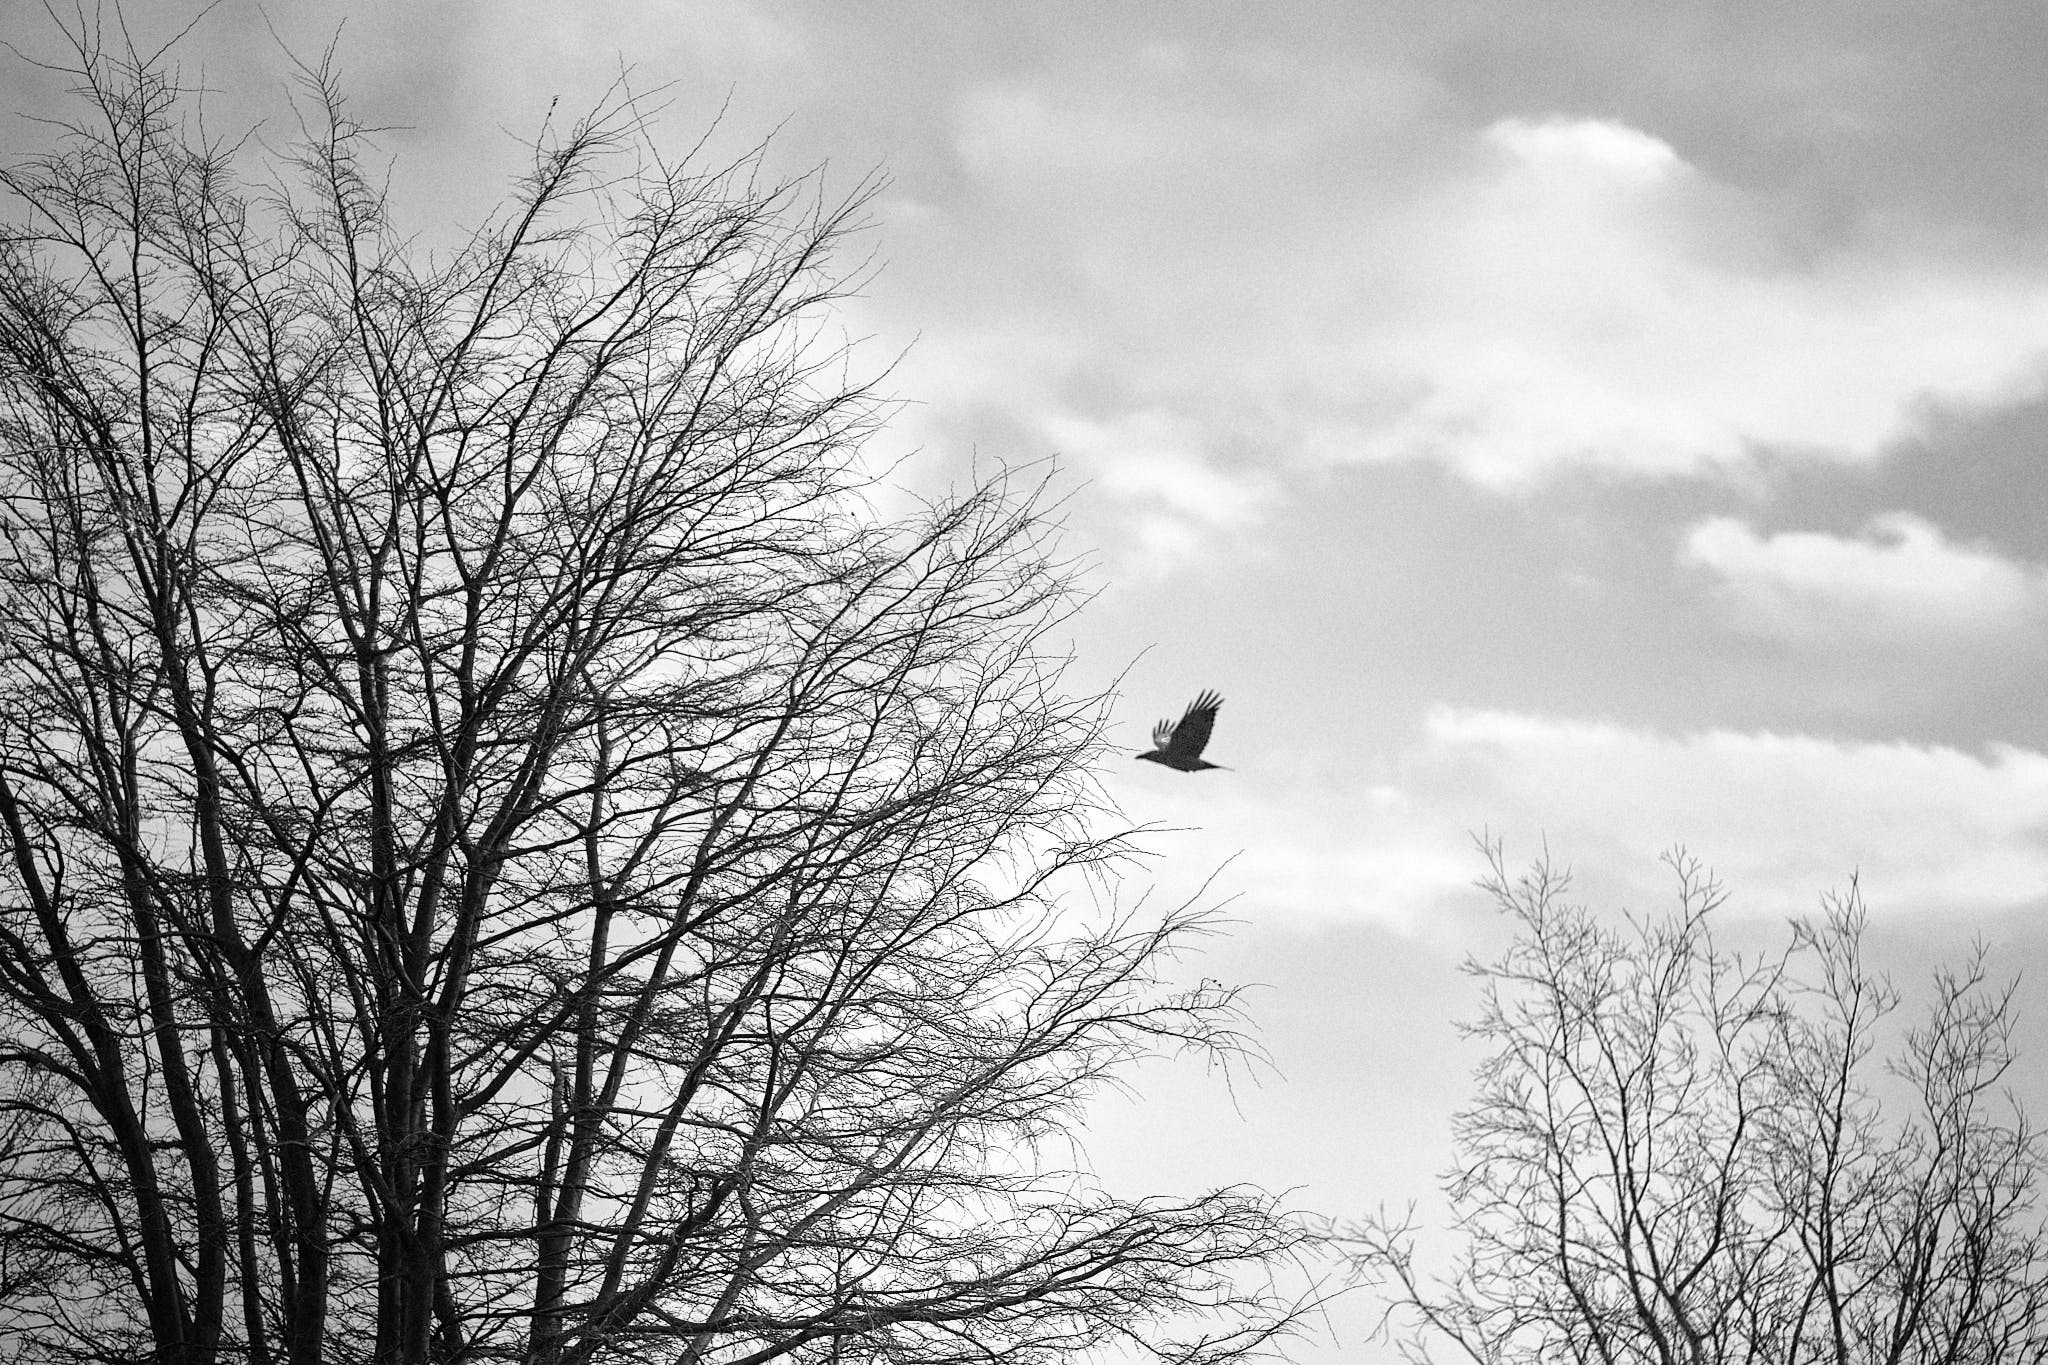 A raven flies behind some trees